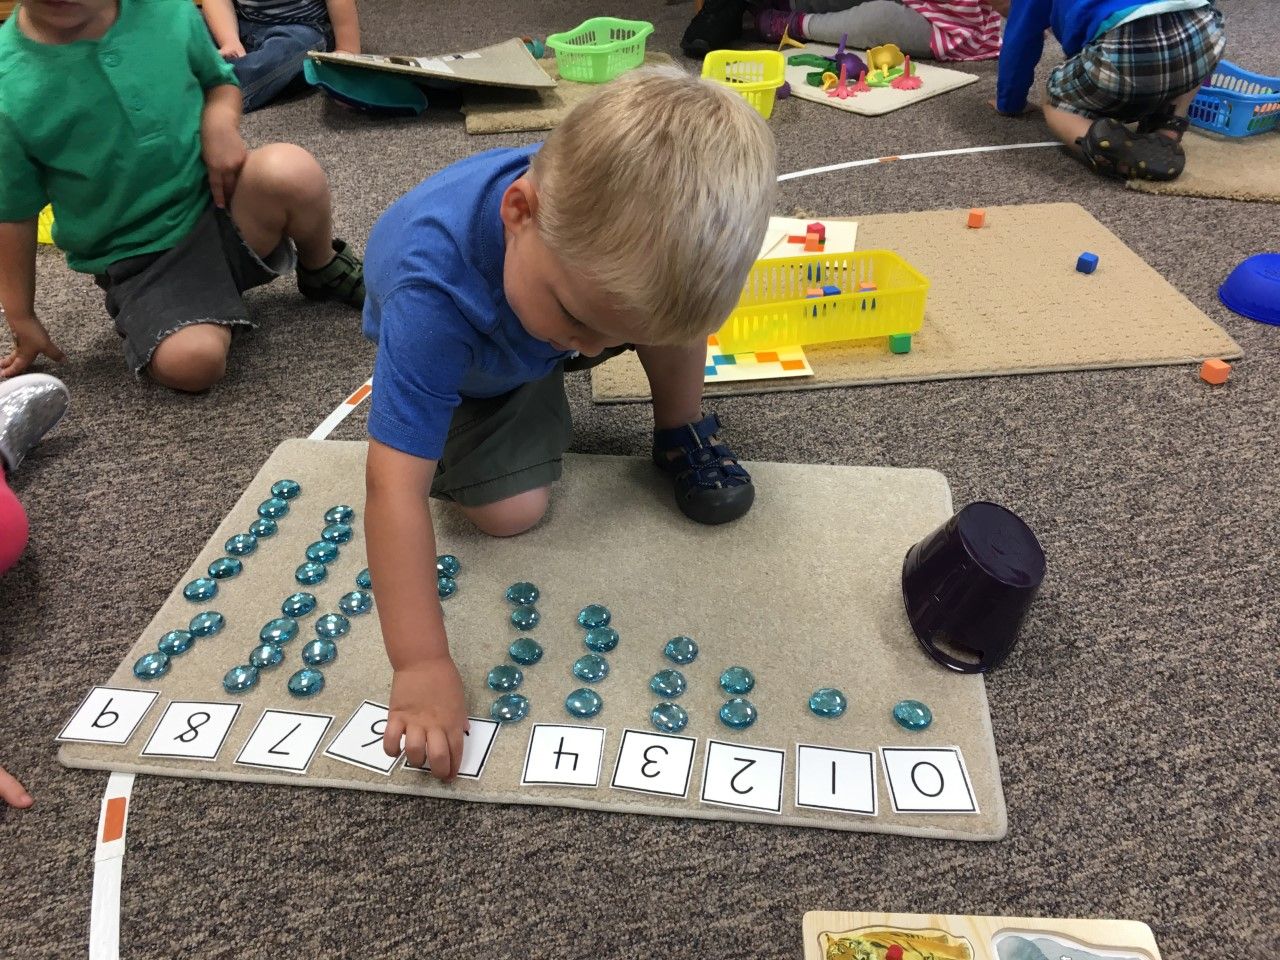 A young boy is playing with numbers on the floor.